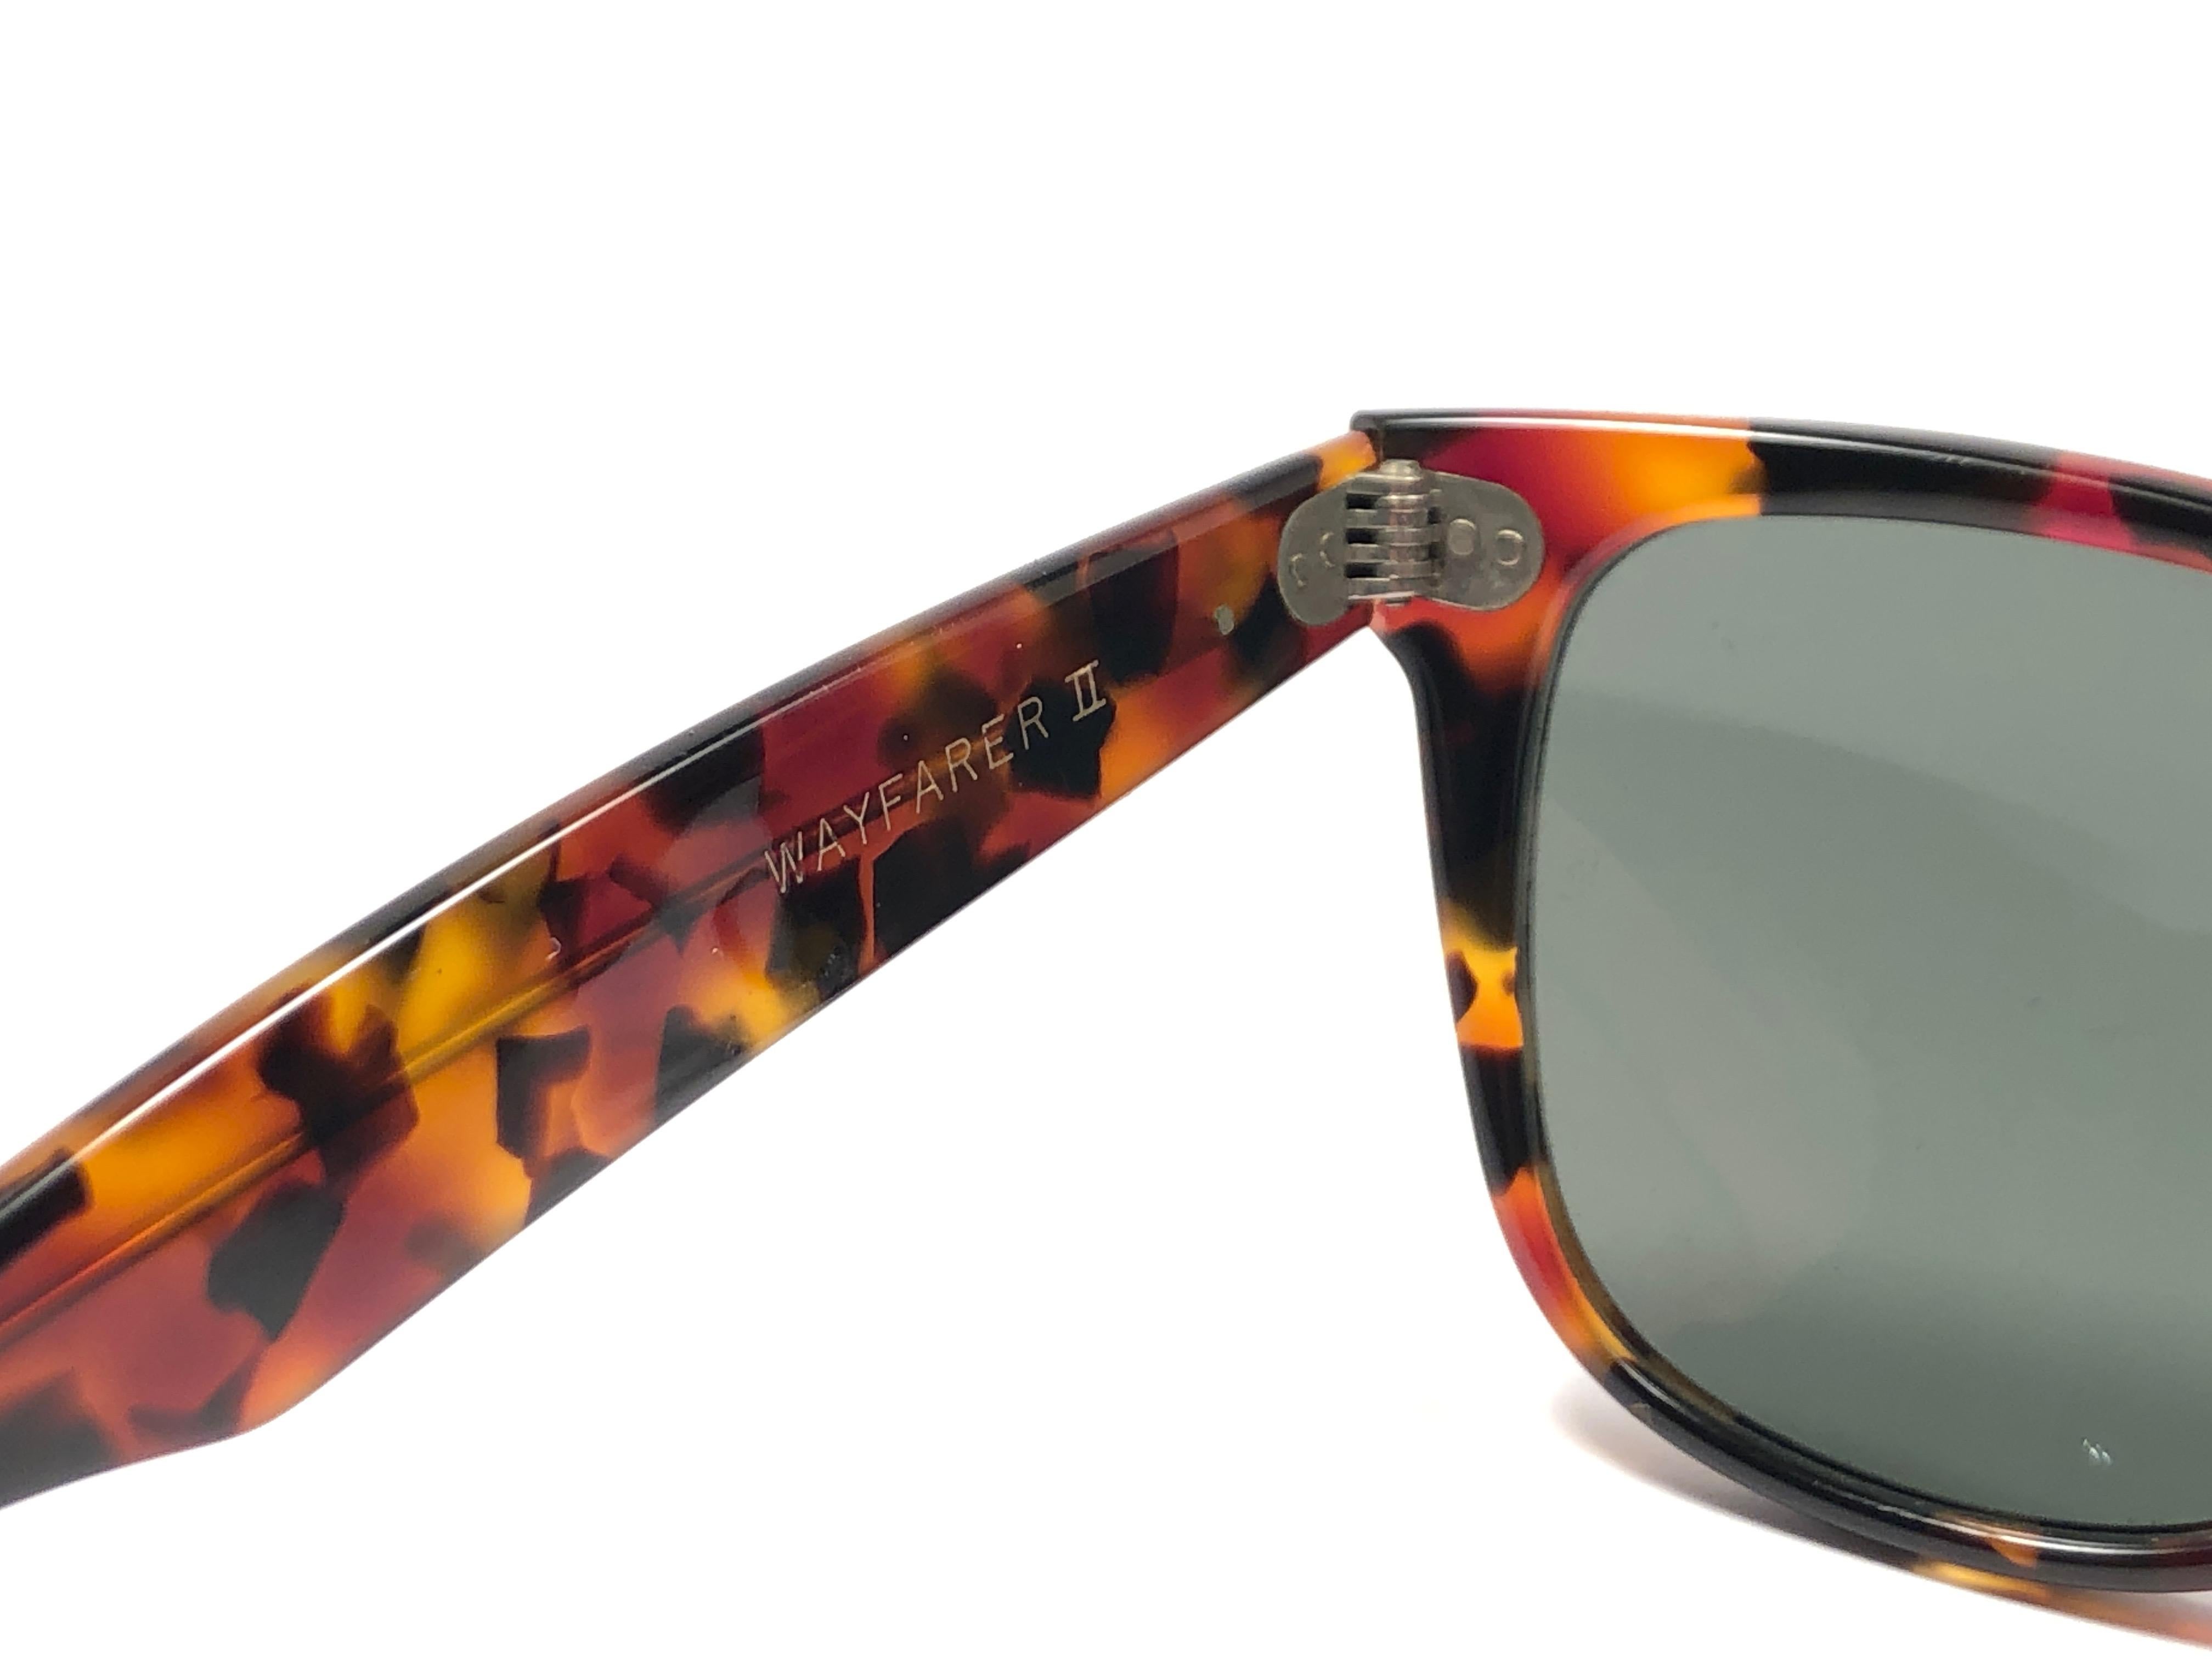 New classic Wayfarer II in tortoise.  B&L etched in both G15 grey lenses. Please notice that this item is nearly 40 years old and could show some storage wear.  New, ever worn or displayed. Made in USA.